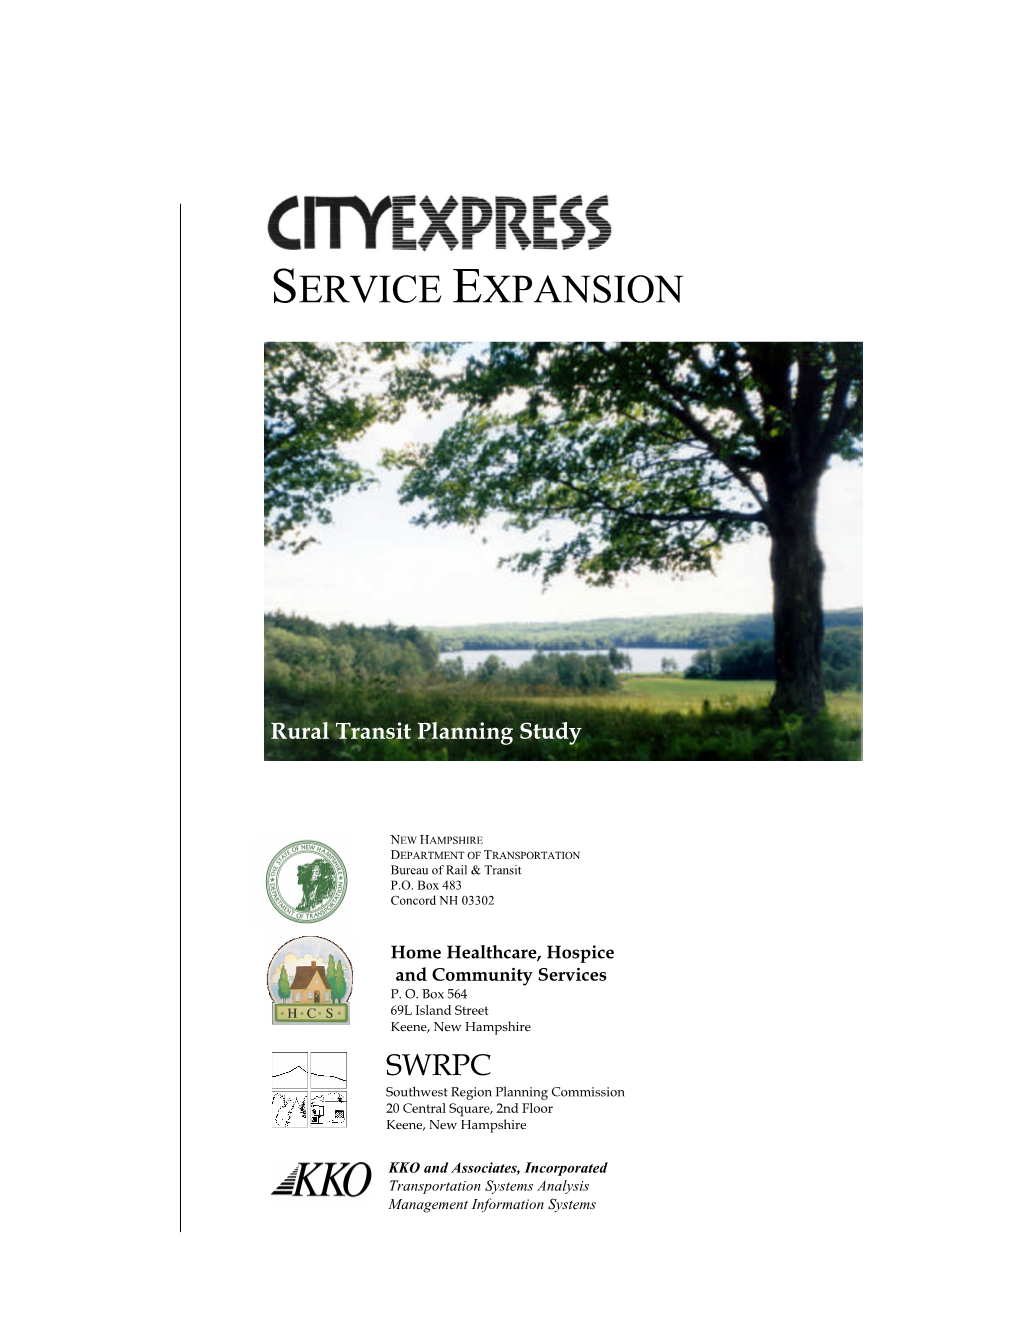 Cityexpress Service Expansion Study to Determine How to Expand Cityexpress Service, and to Determine the Costs, Benefits, and Other Impacts of Doing So